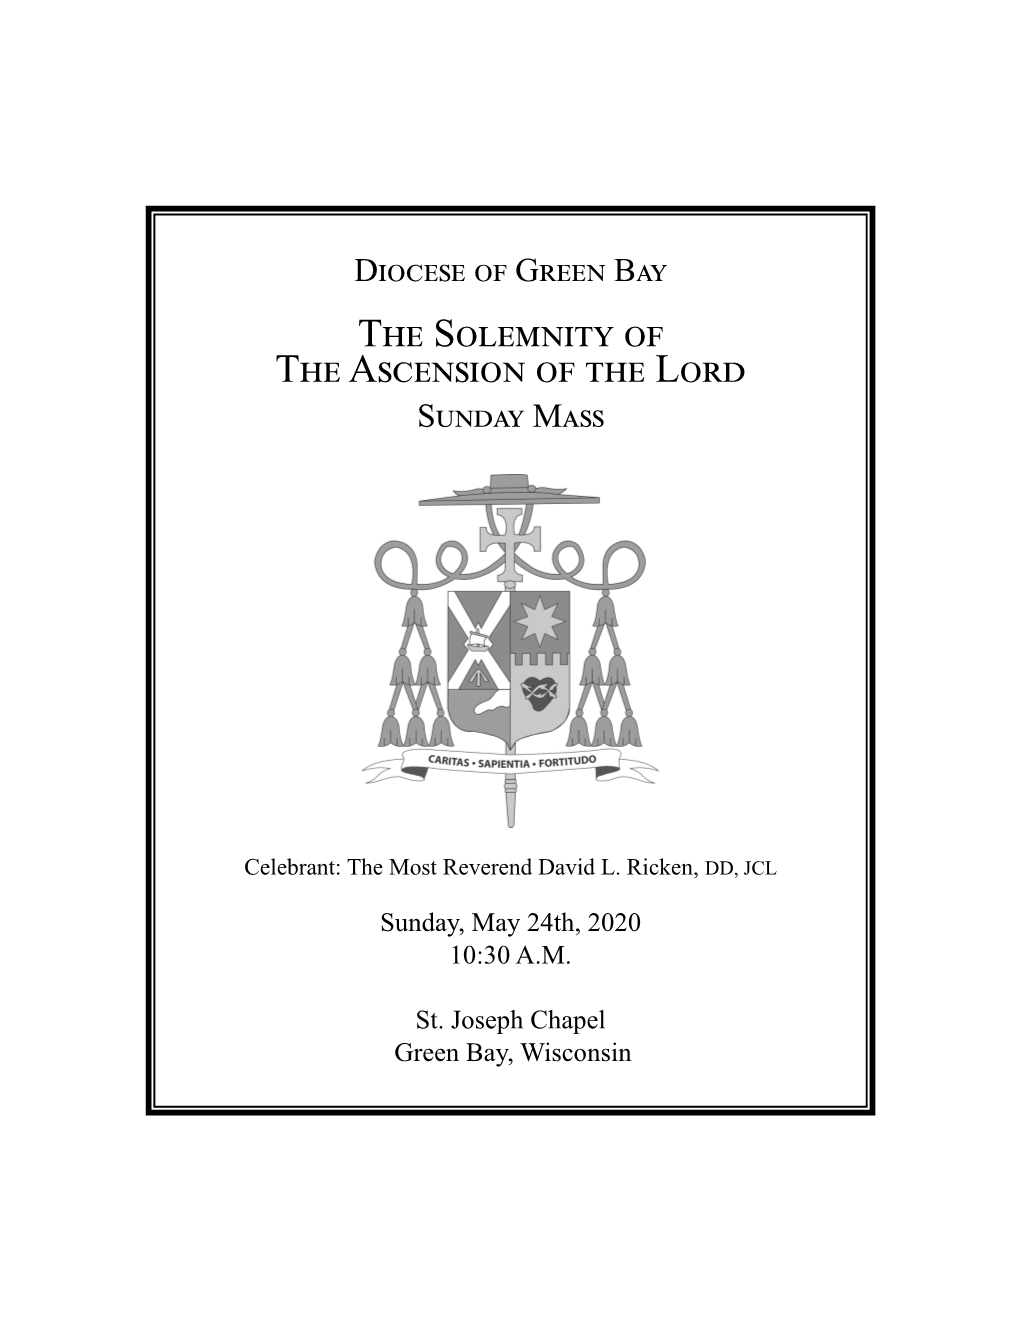 The Solemnity of the Ascension of the Lord